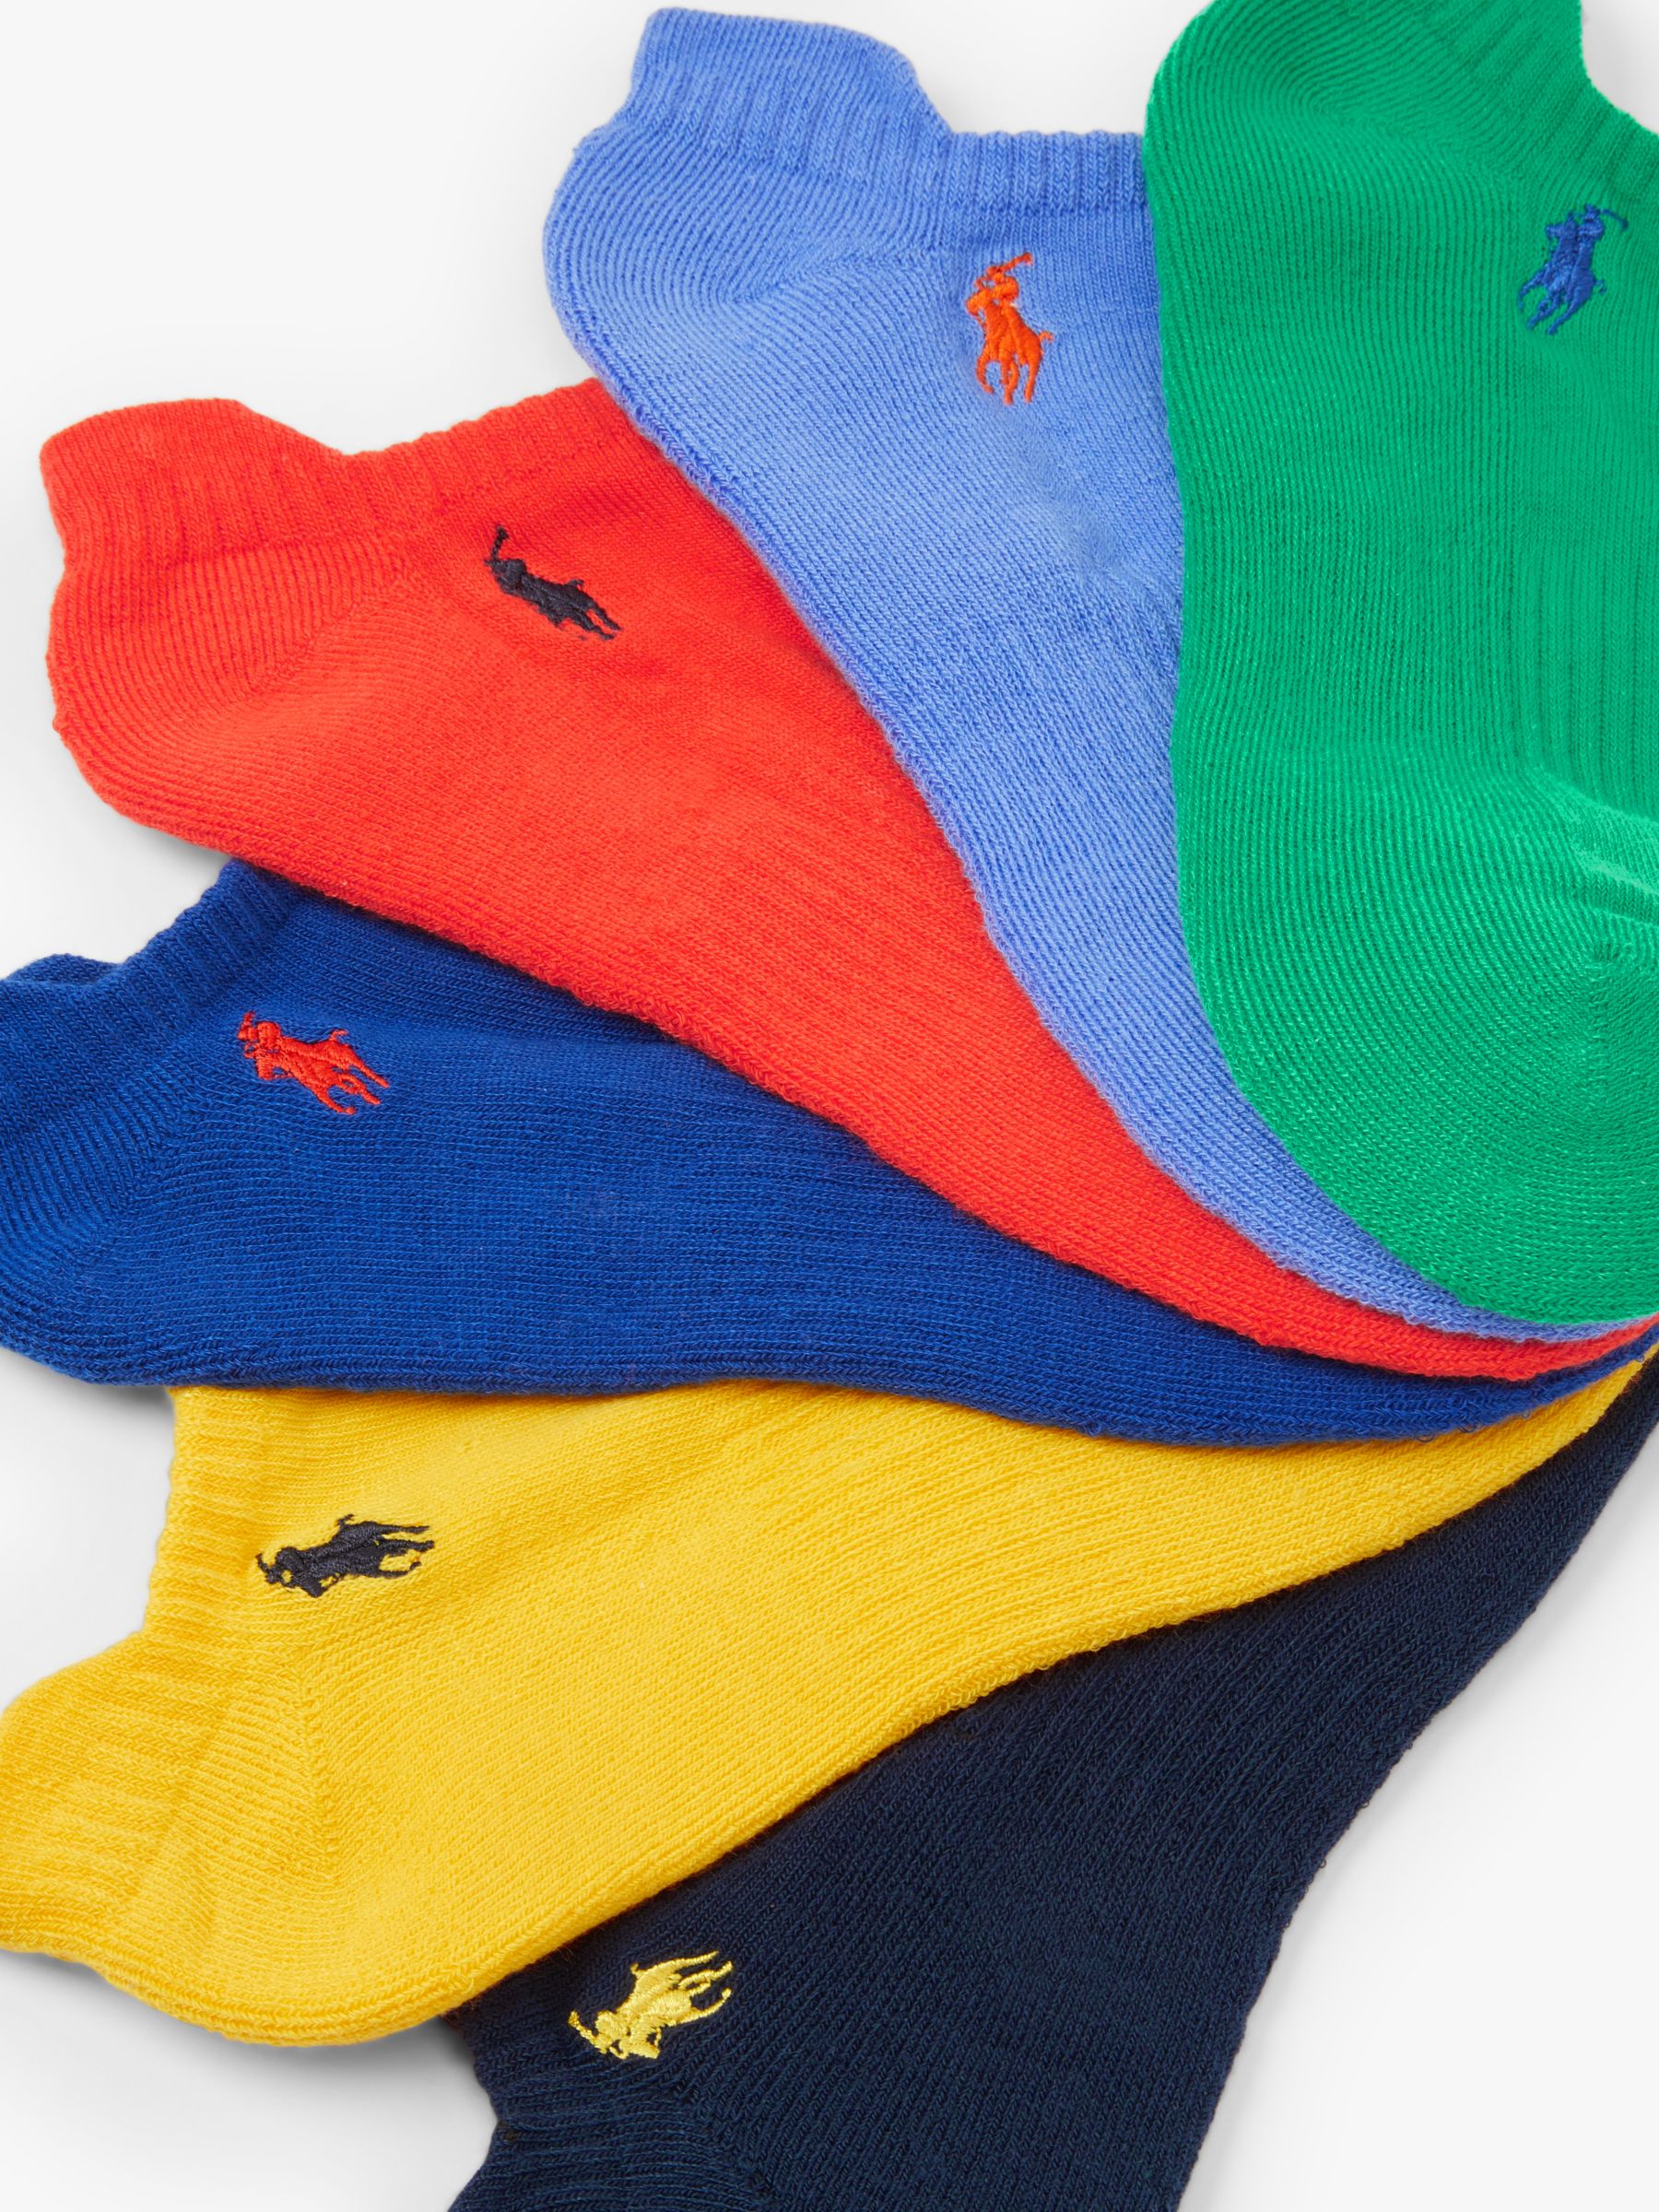 Buy Polo Ralph Lauren Cotton Blend Trainer Socks, One Size, Pack of 6, Multi Online at johnlewis.com